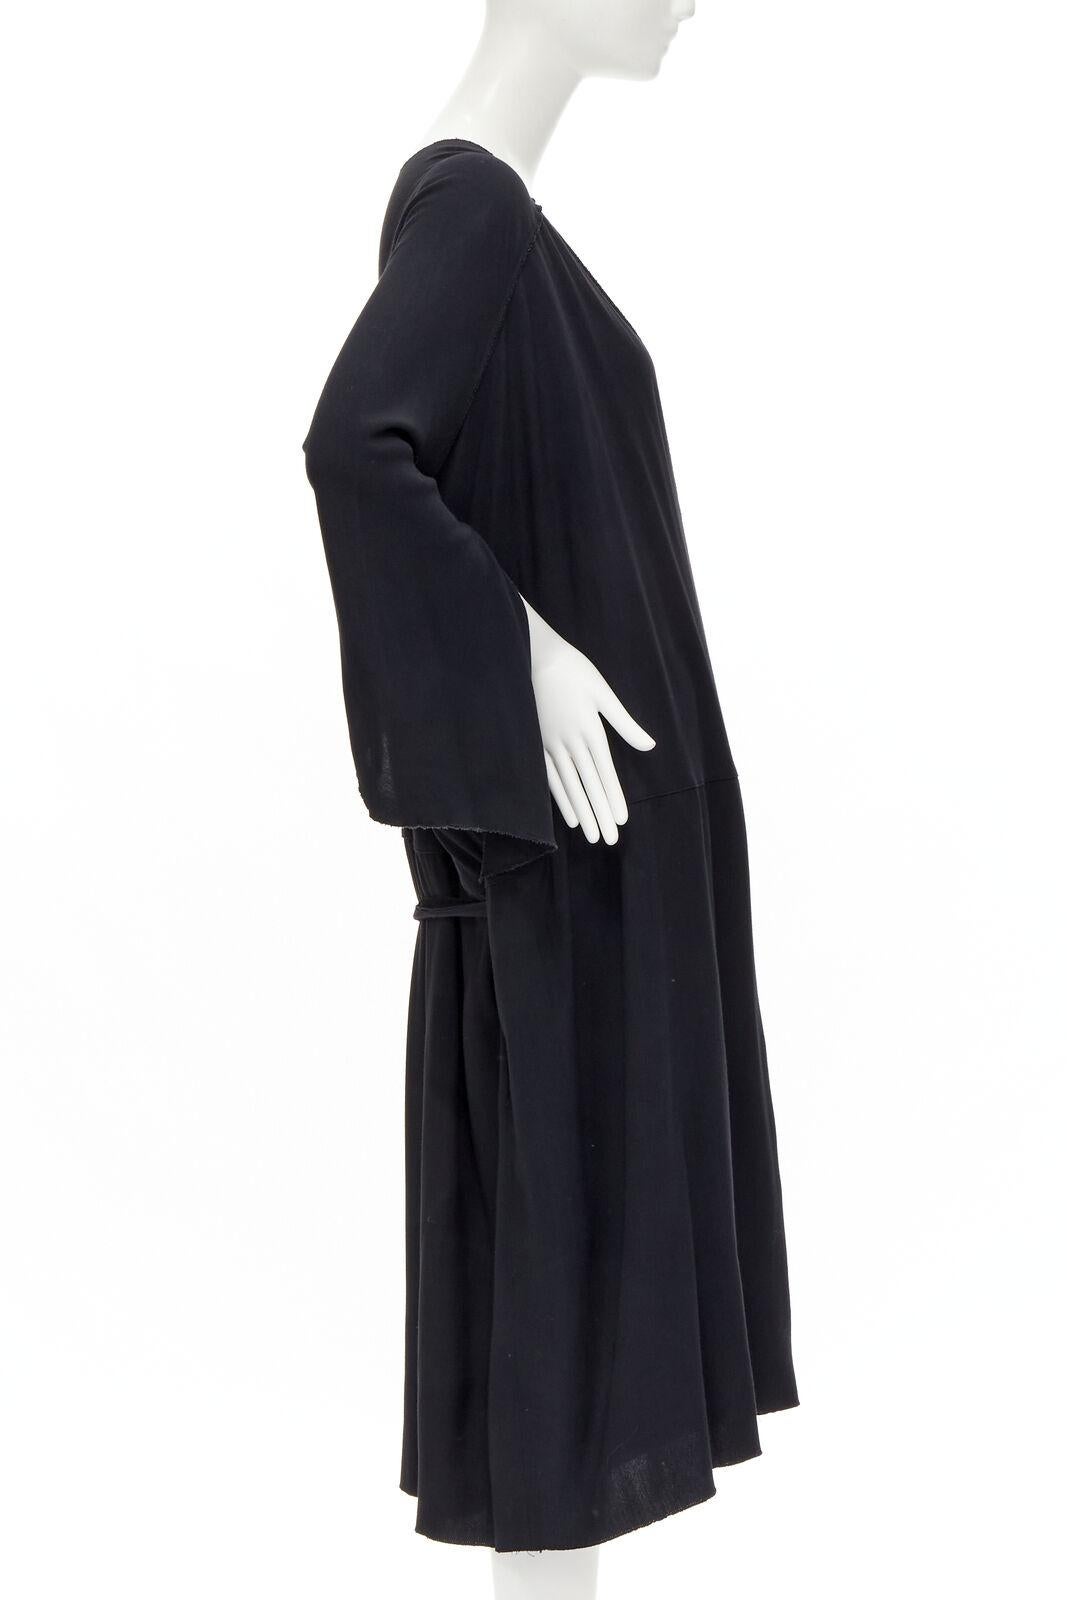 rare COMME DES GARCONS Vintage 1980's black asymmetric wrap kimono robe dress In Excellent Condition For Sale In Hong Kong, NT